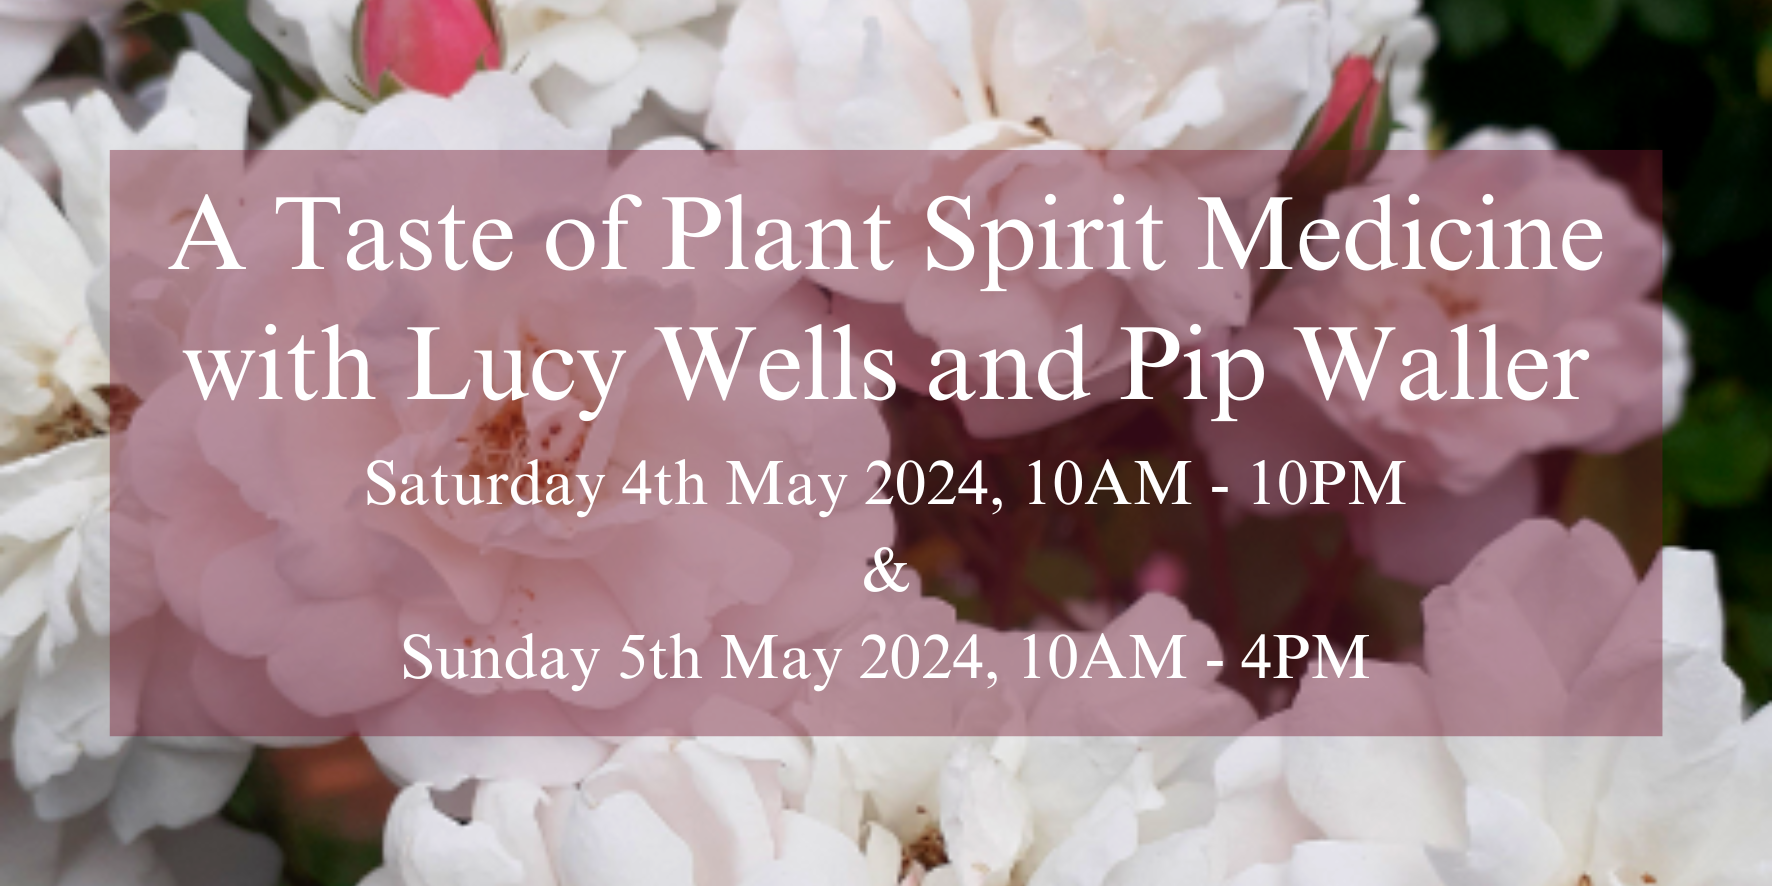 A Taste of Plant Spirit Medicine with Lucy Wells and Pip Waller